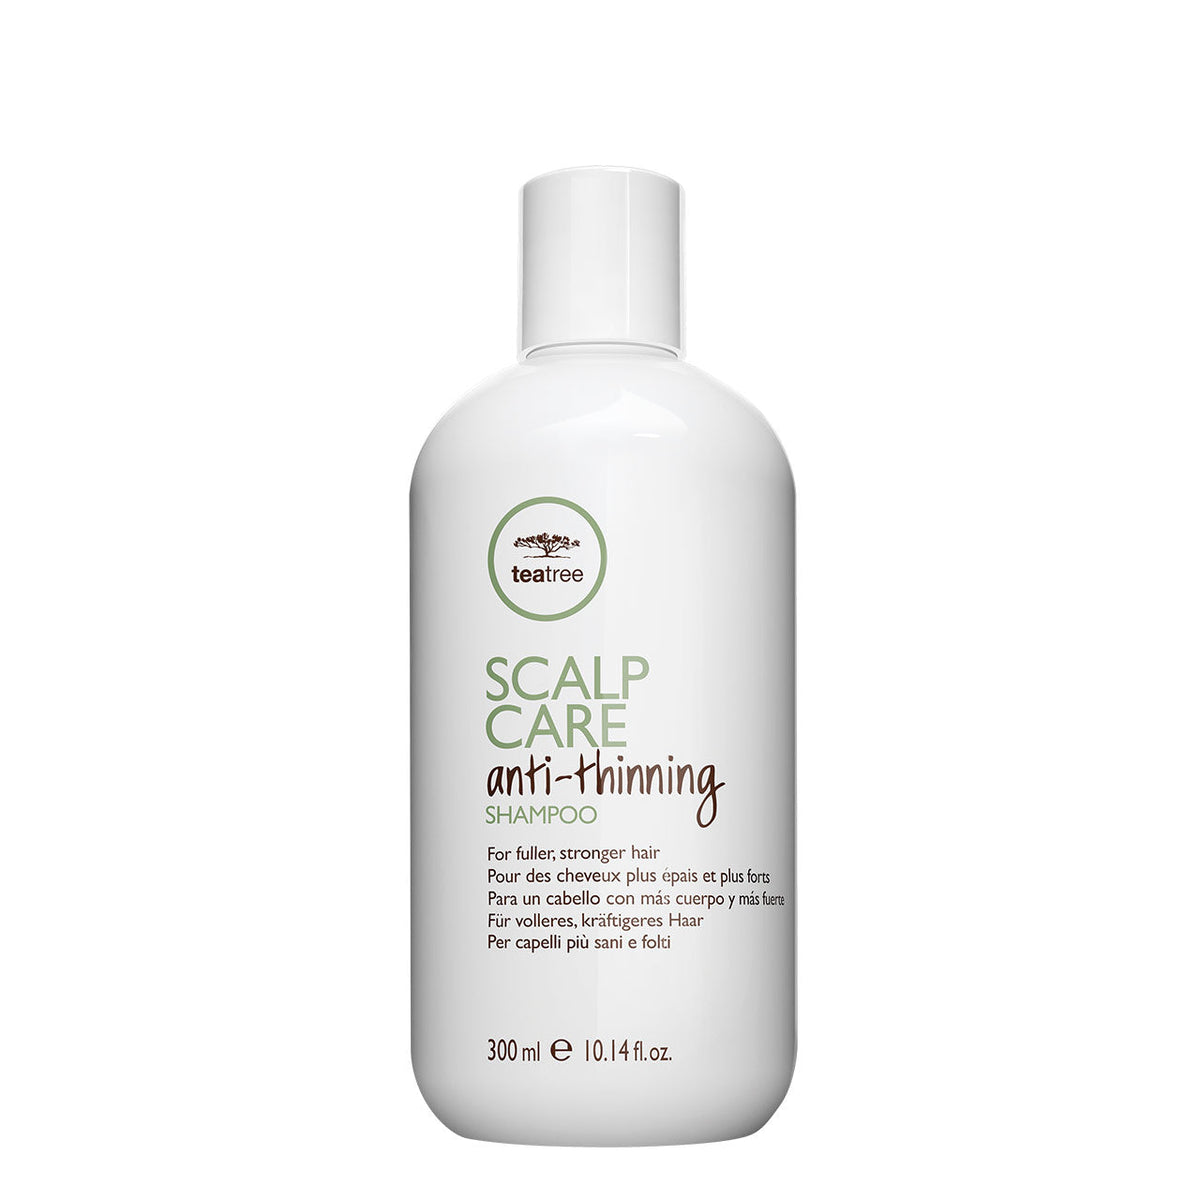 Tea Tree Scalp Care Anti-Thinning Shampoo - 300ML - by Paul Mitchell |ProCare Outlet|